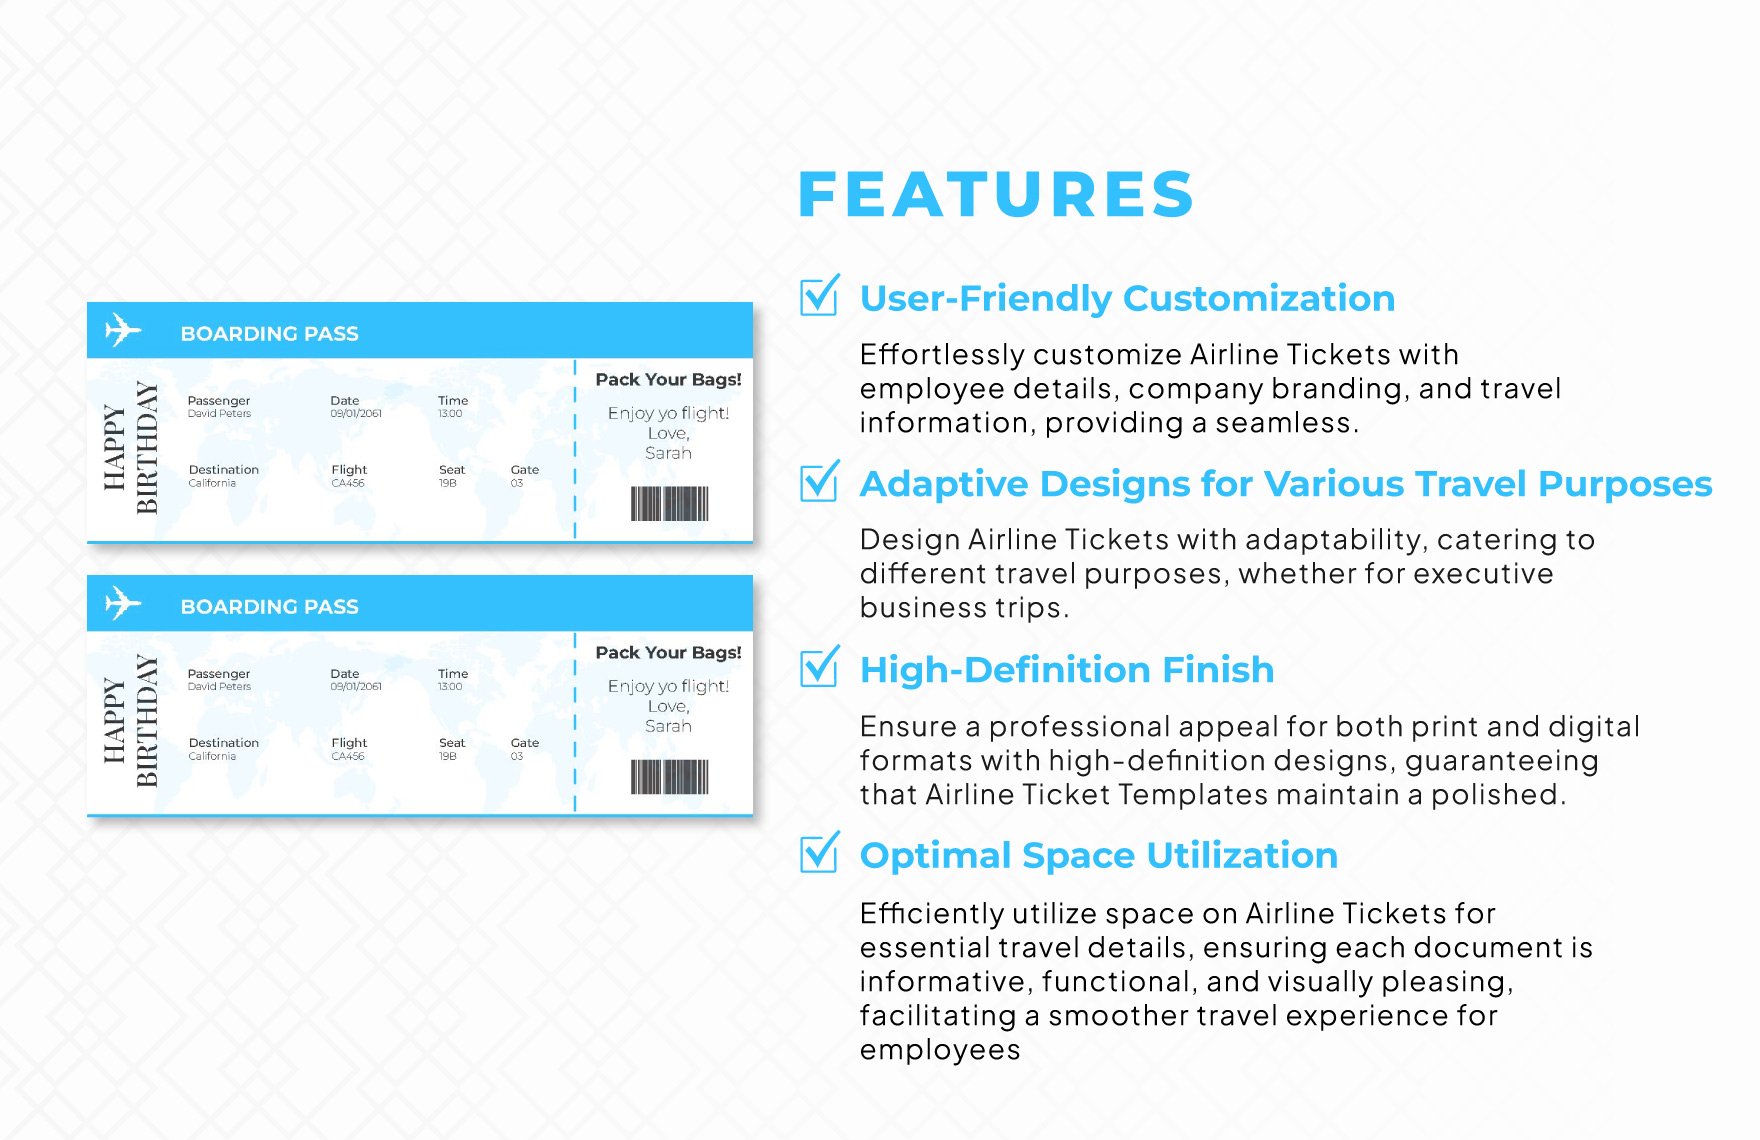 Surprise Airline Ticket Template